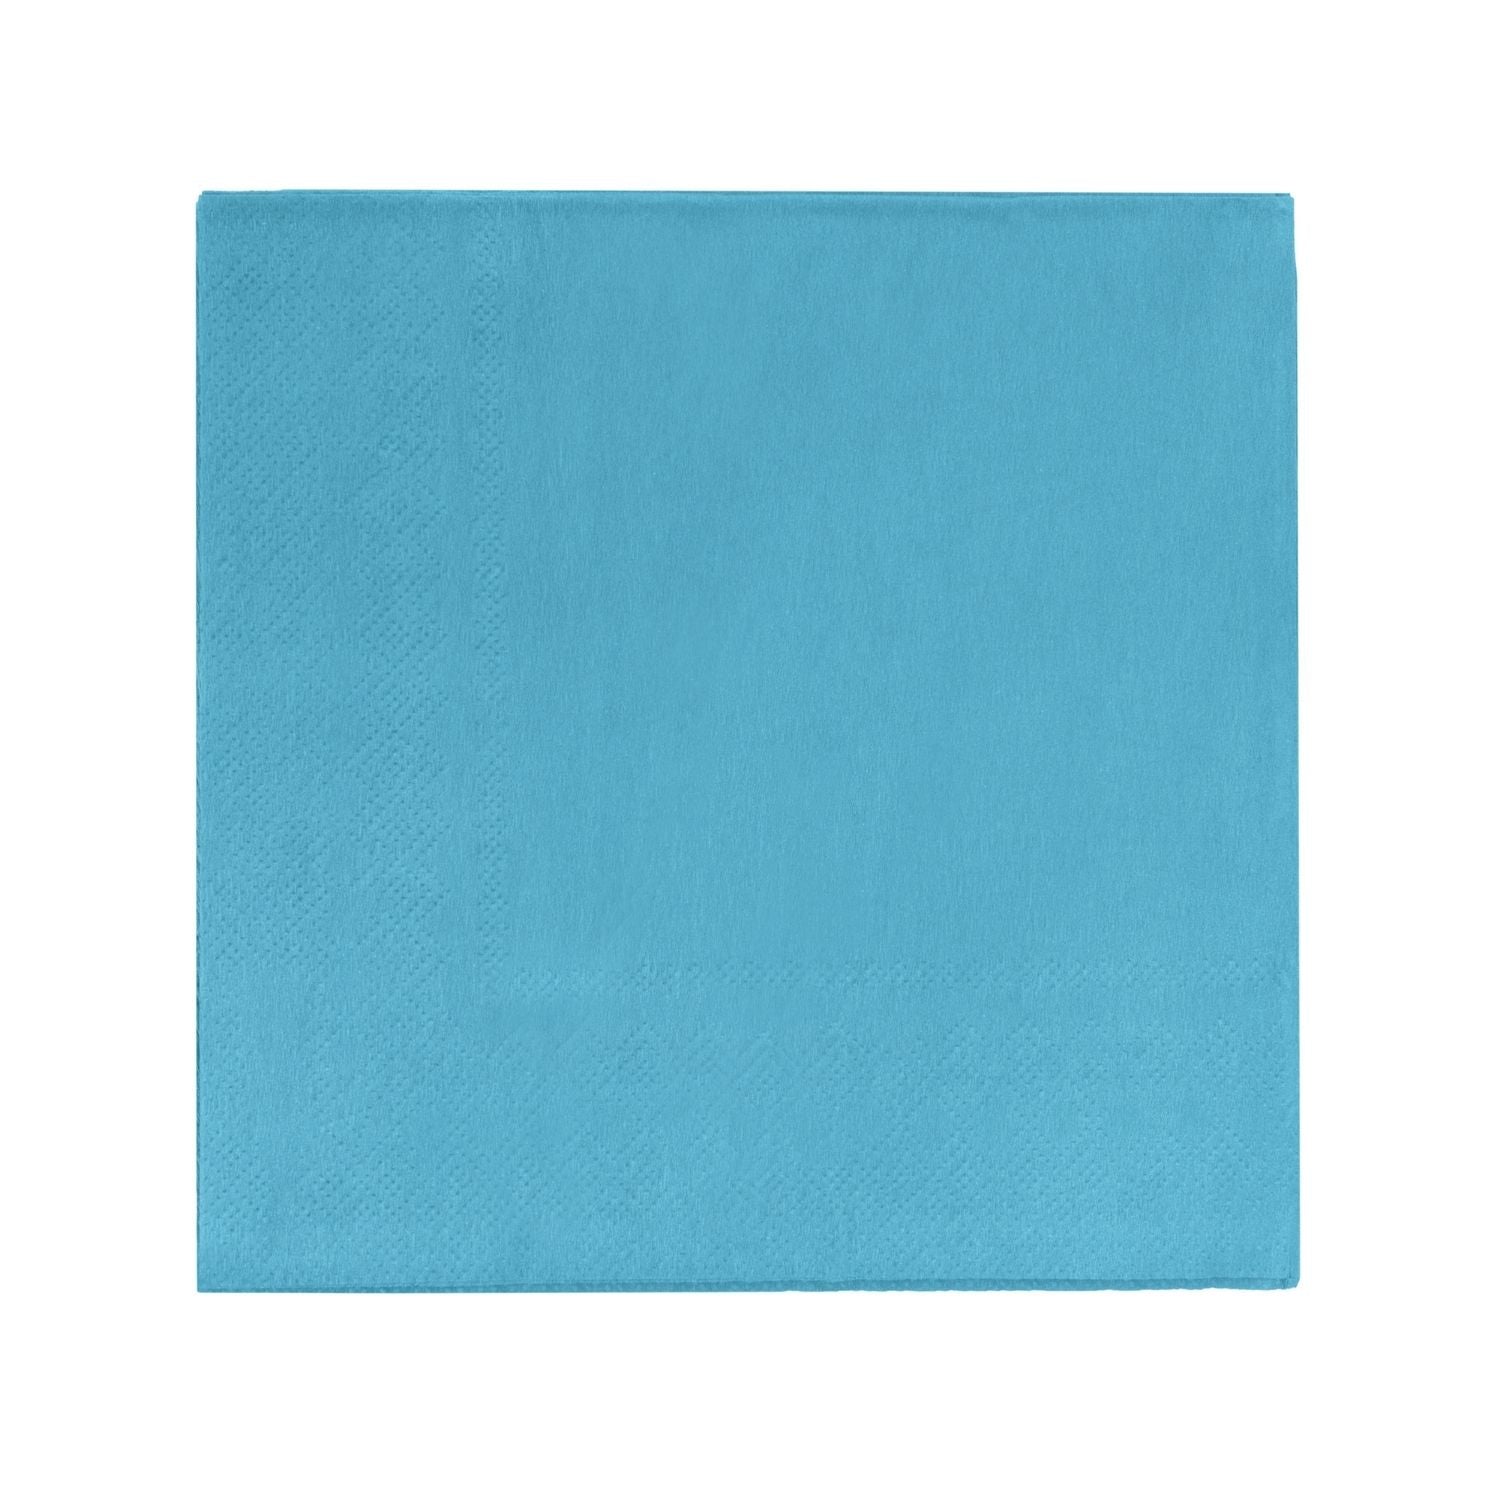 Turquoise Luncheon Napkins | 3600 Pack